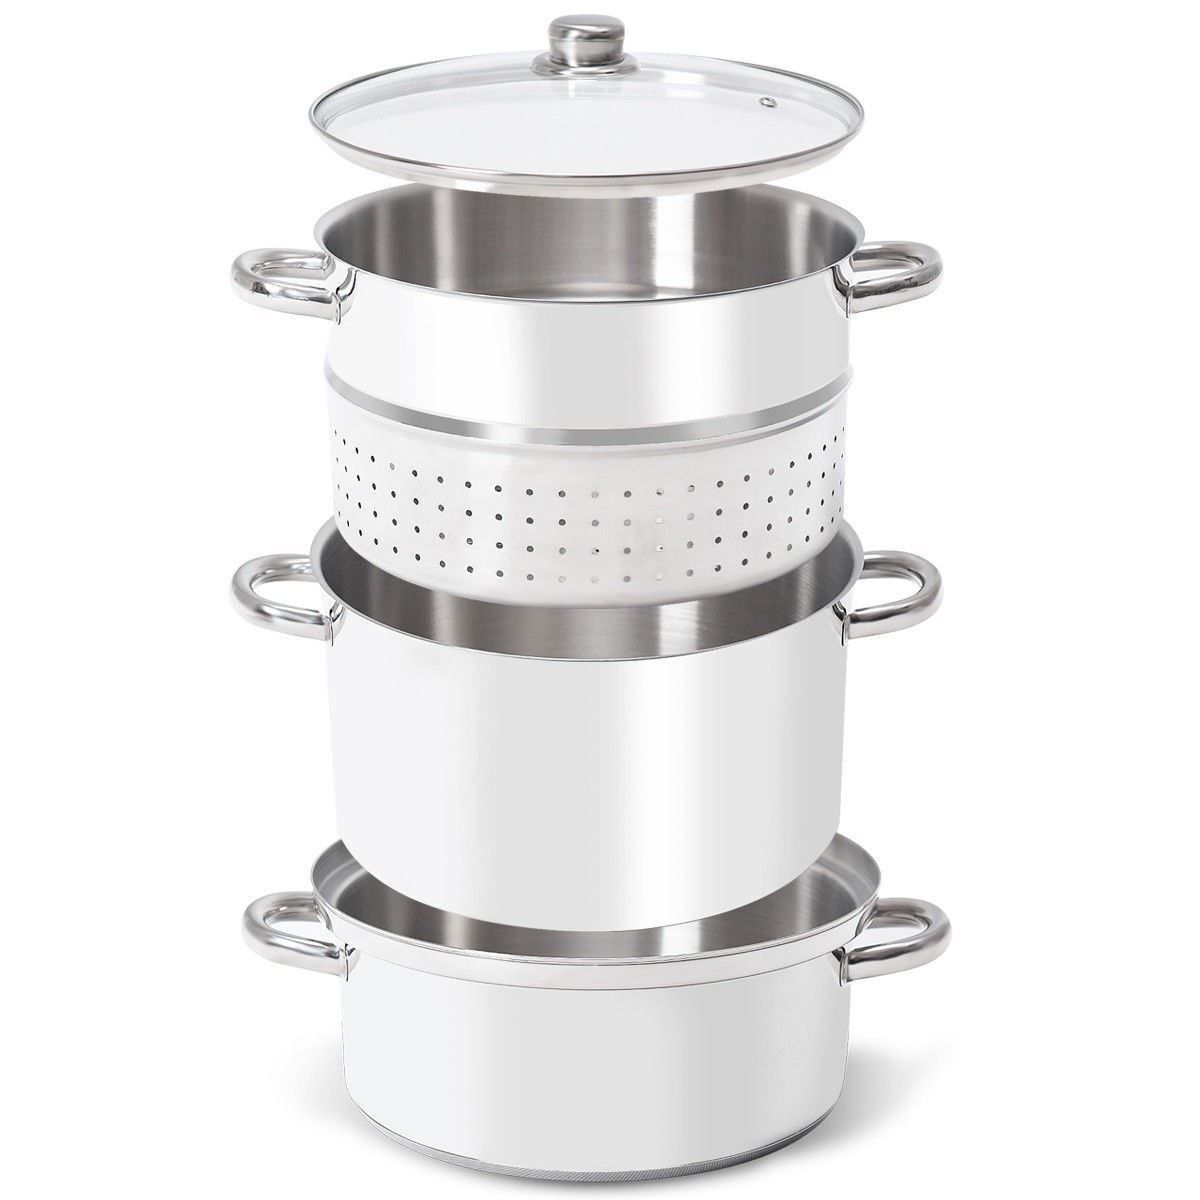 Oster Bluemarine Expandable Stainless Steel Steamer Basket